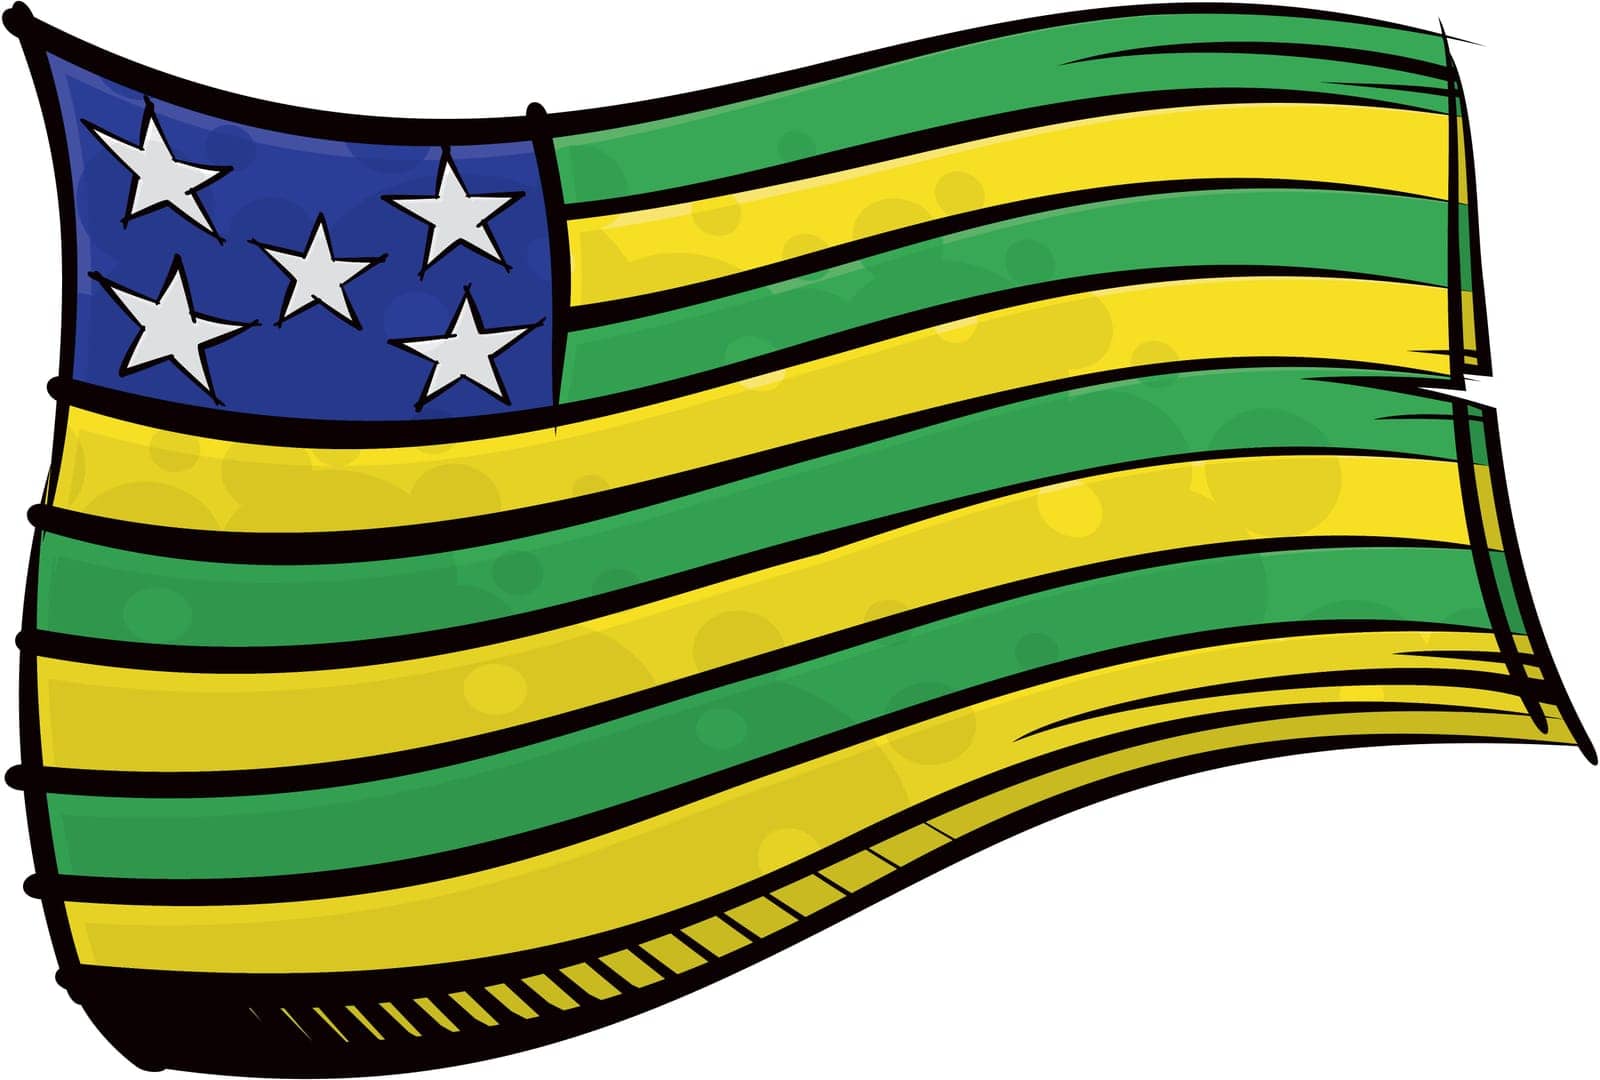 Brazilian state Goias national flag created in graffiti paint style